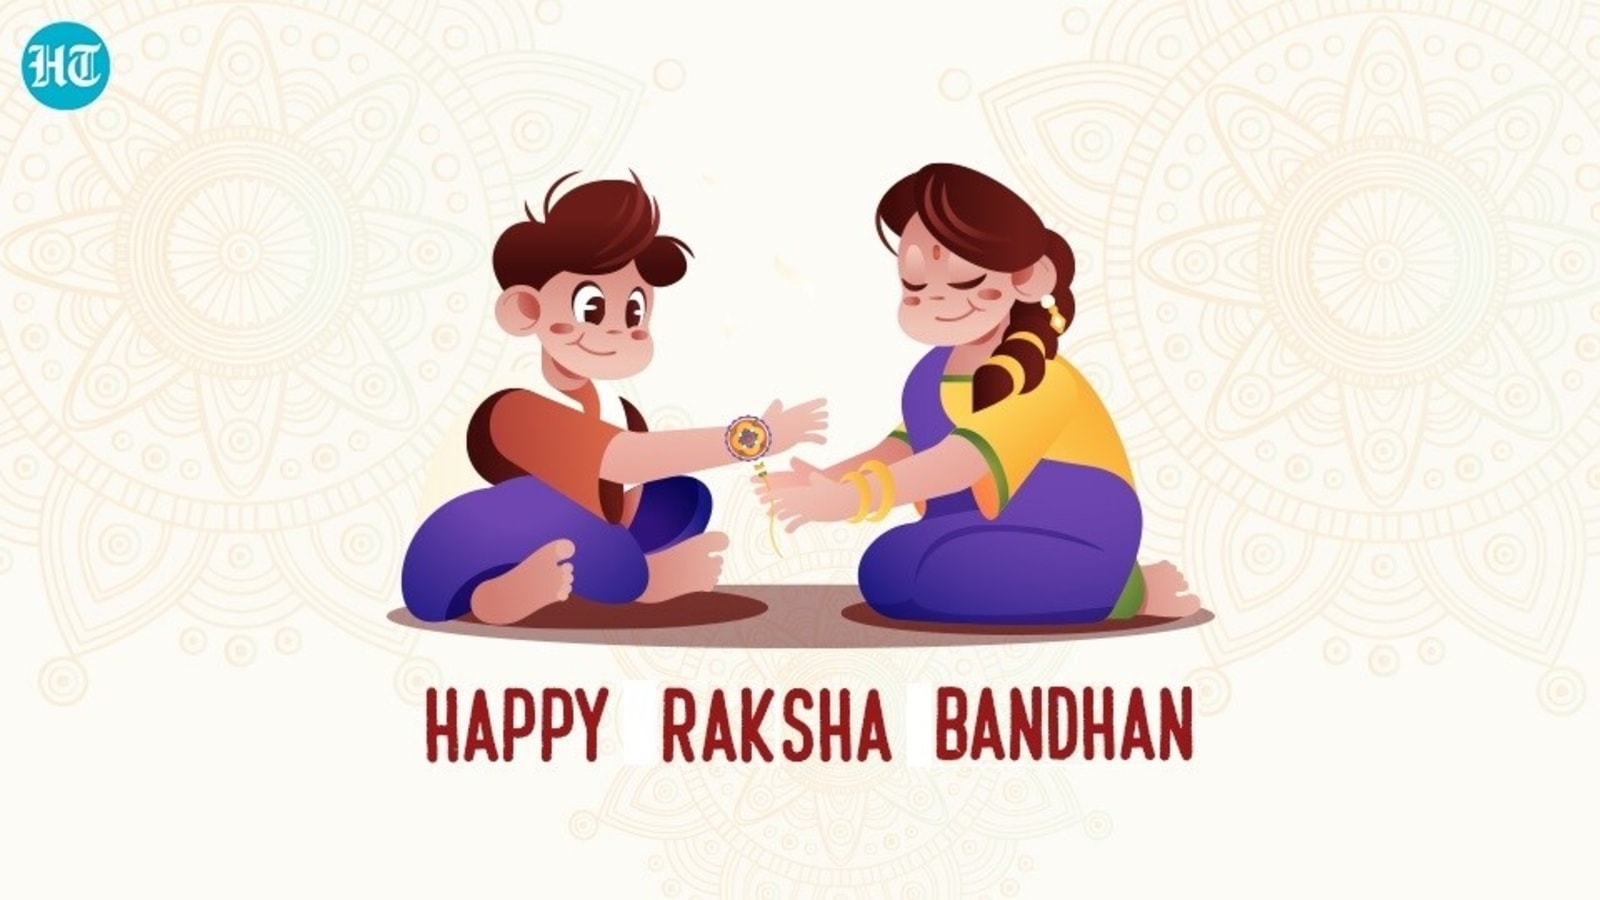 Happy Raksha Bandhan 2022 Best Wishes Images Messages And Greetings To Share With Your 